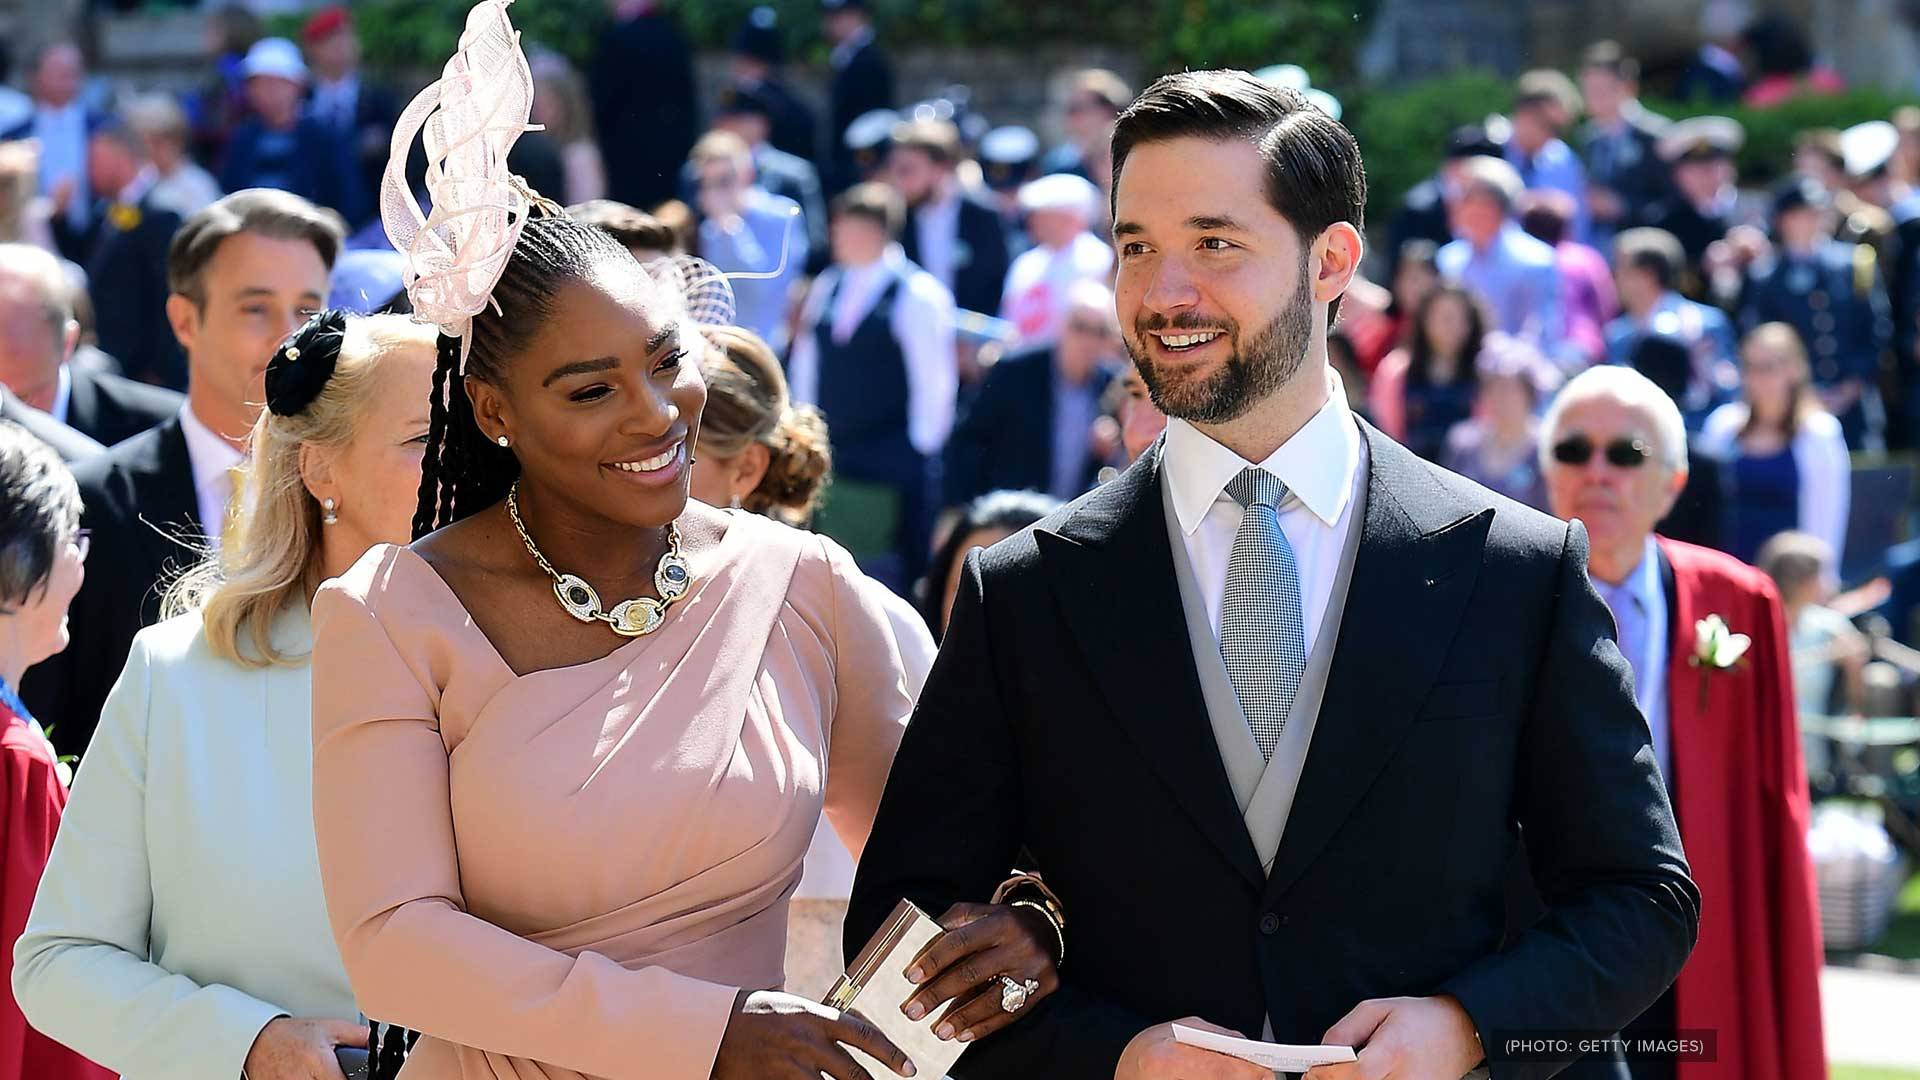 Hollywood couple Serena Williams and Alexis Ohanian at the Royal Wedding on BET Breaks in 2018.